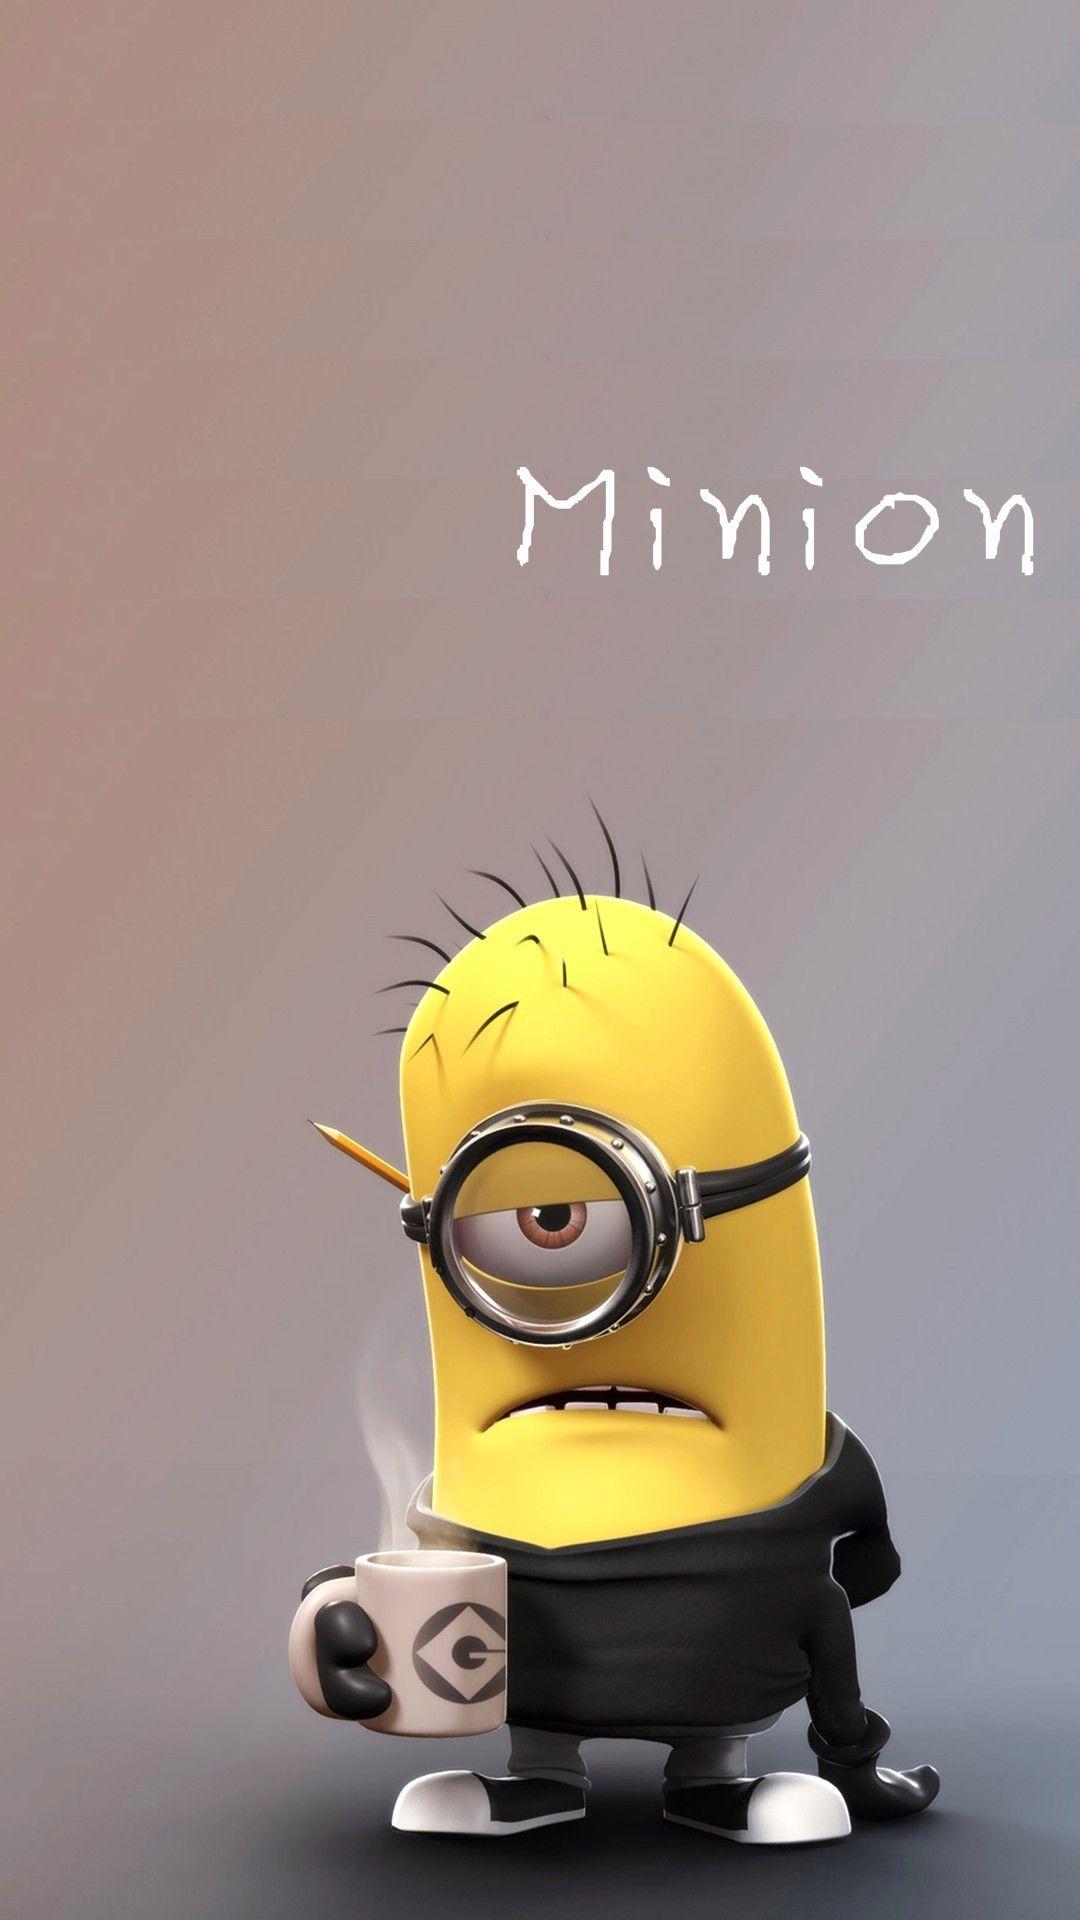 Hd Wallpaper for iPhone 6 Minions Best Of iPhone 5 Wallpaper Minion